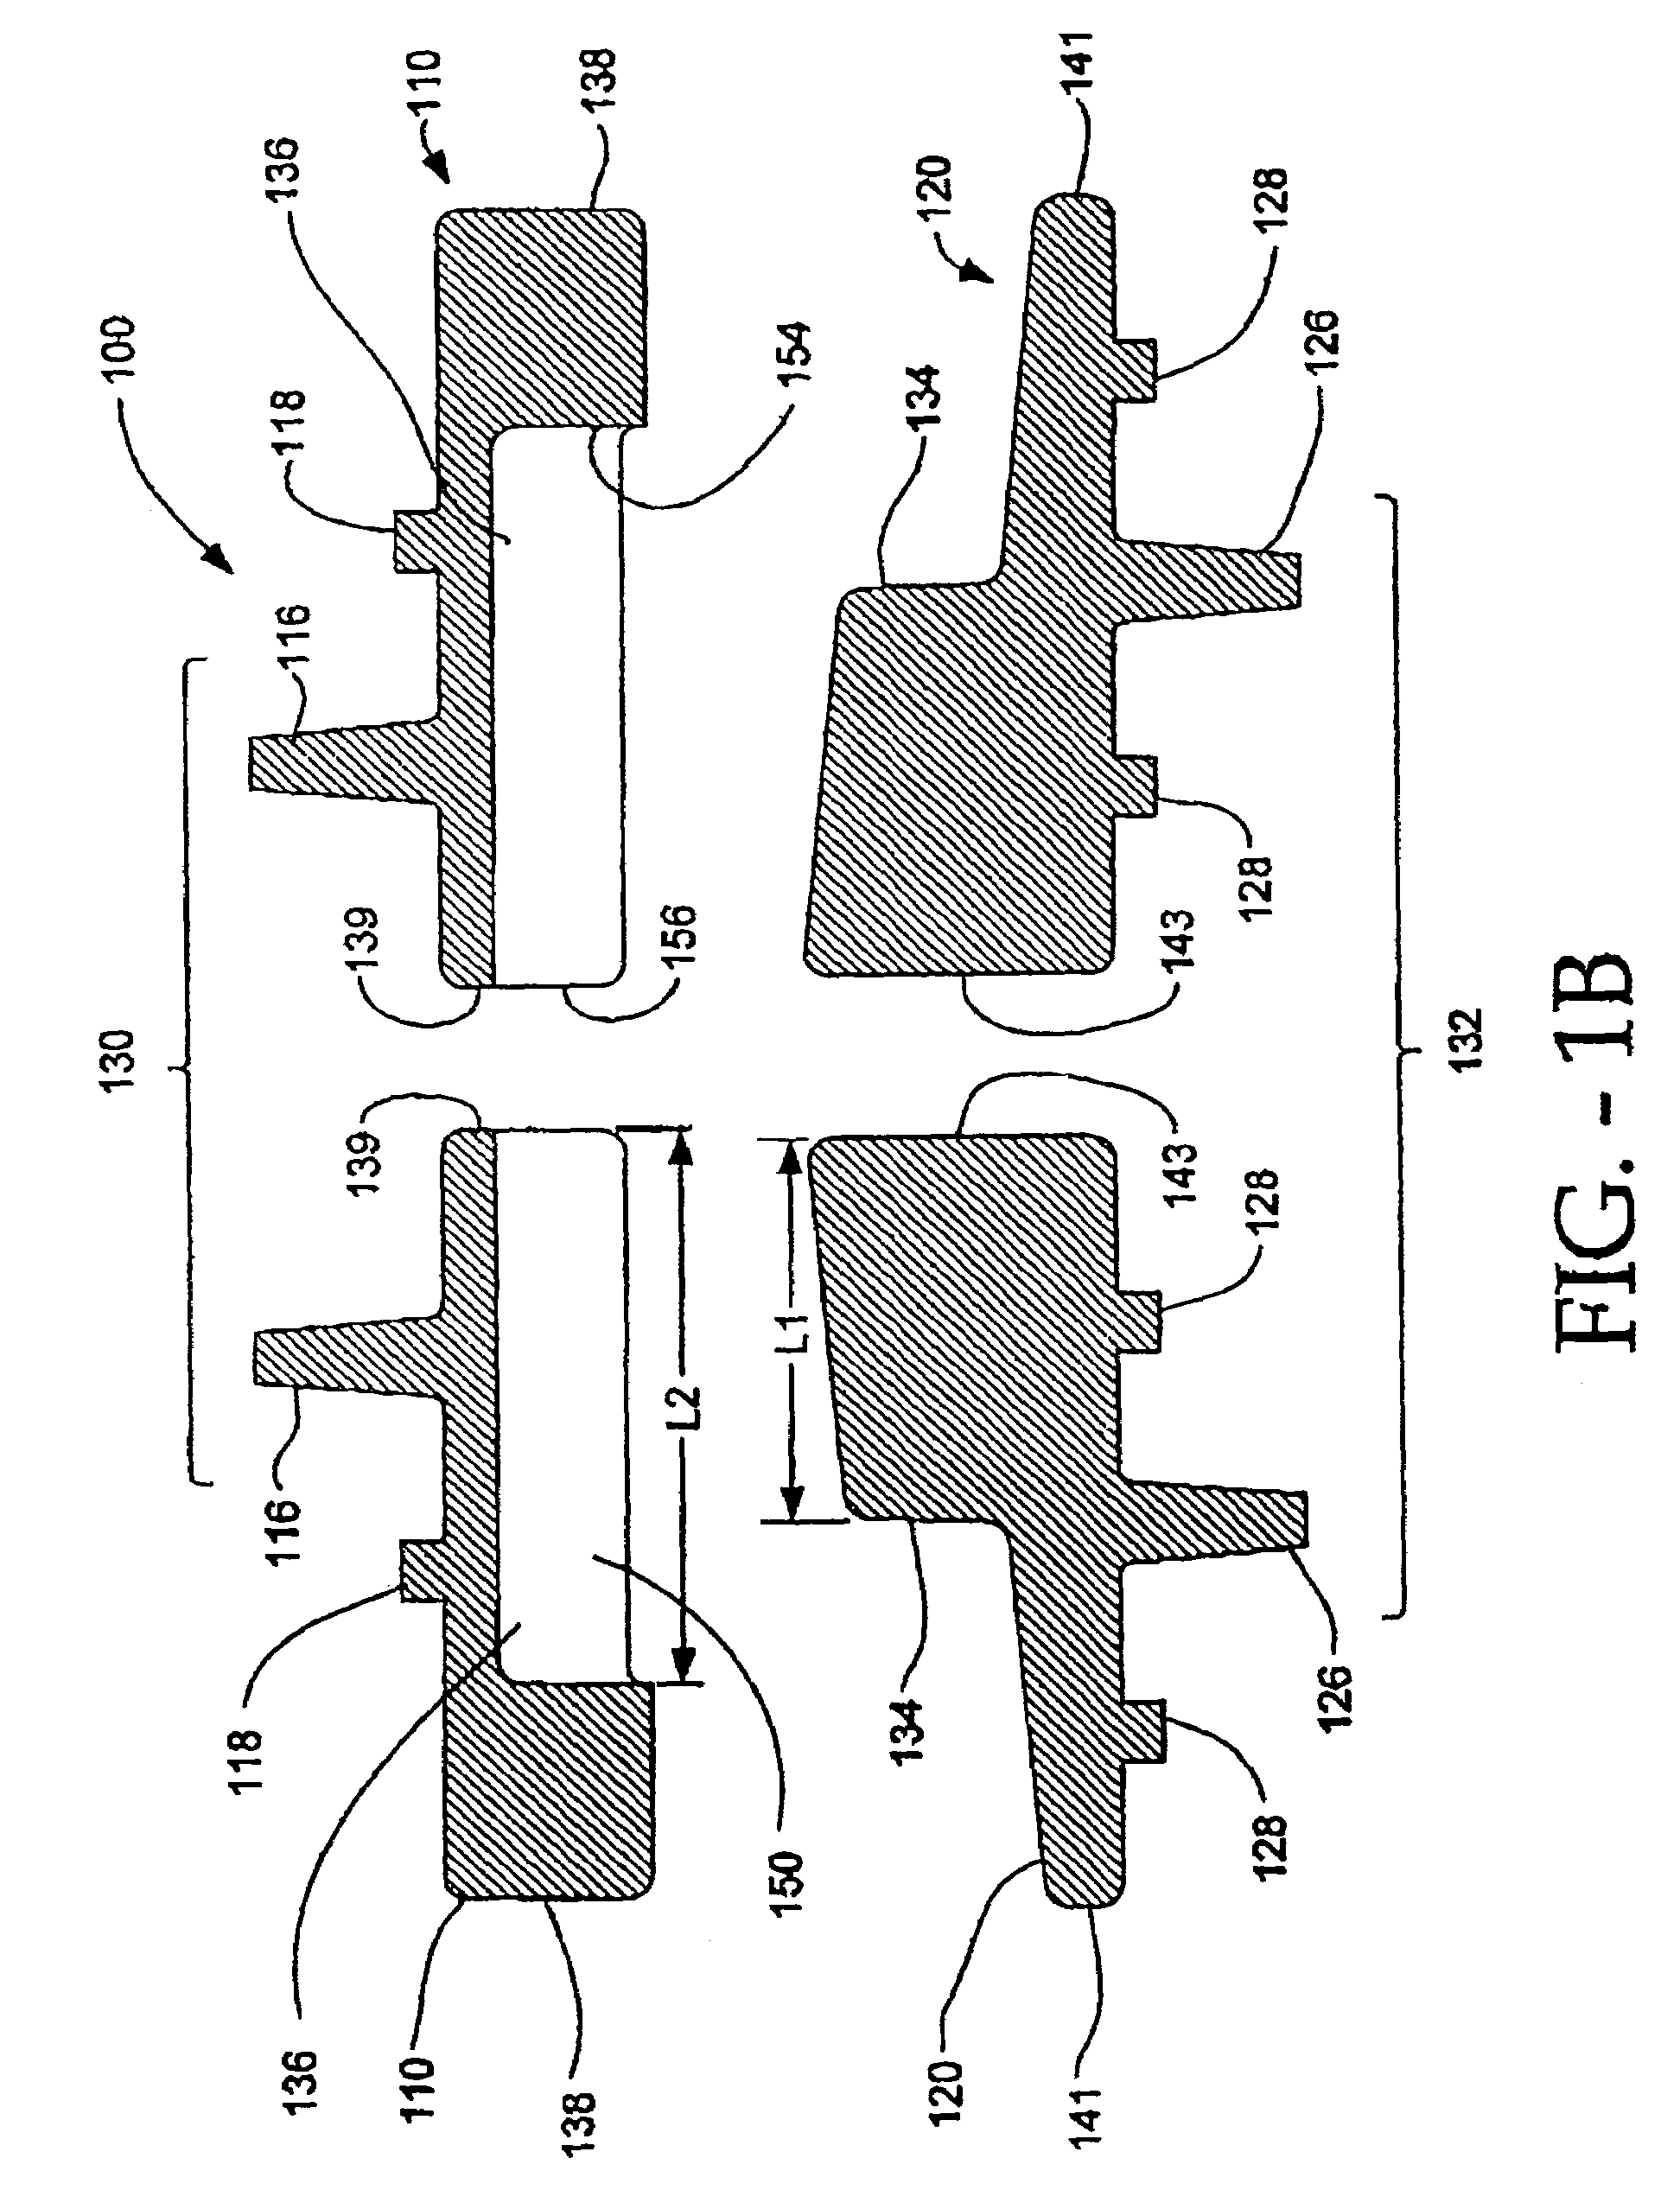 Tools for implanting an artificial vertebral disk